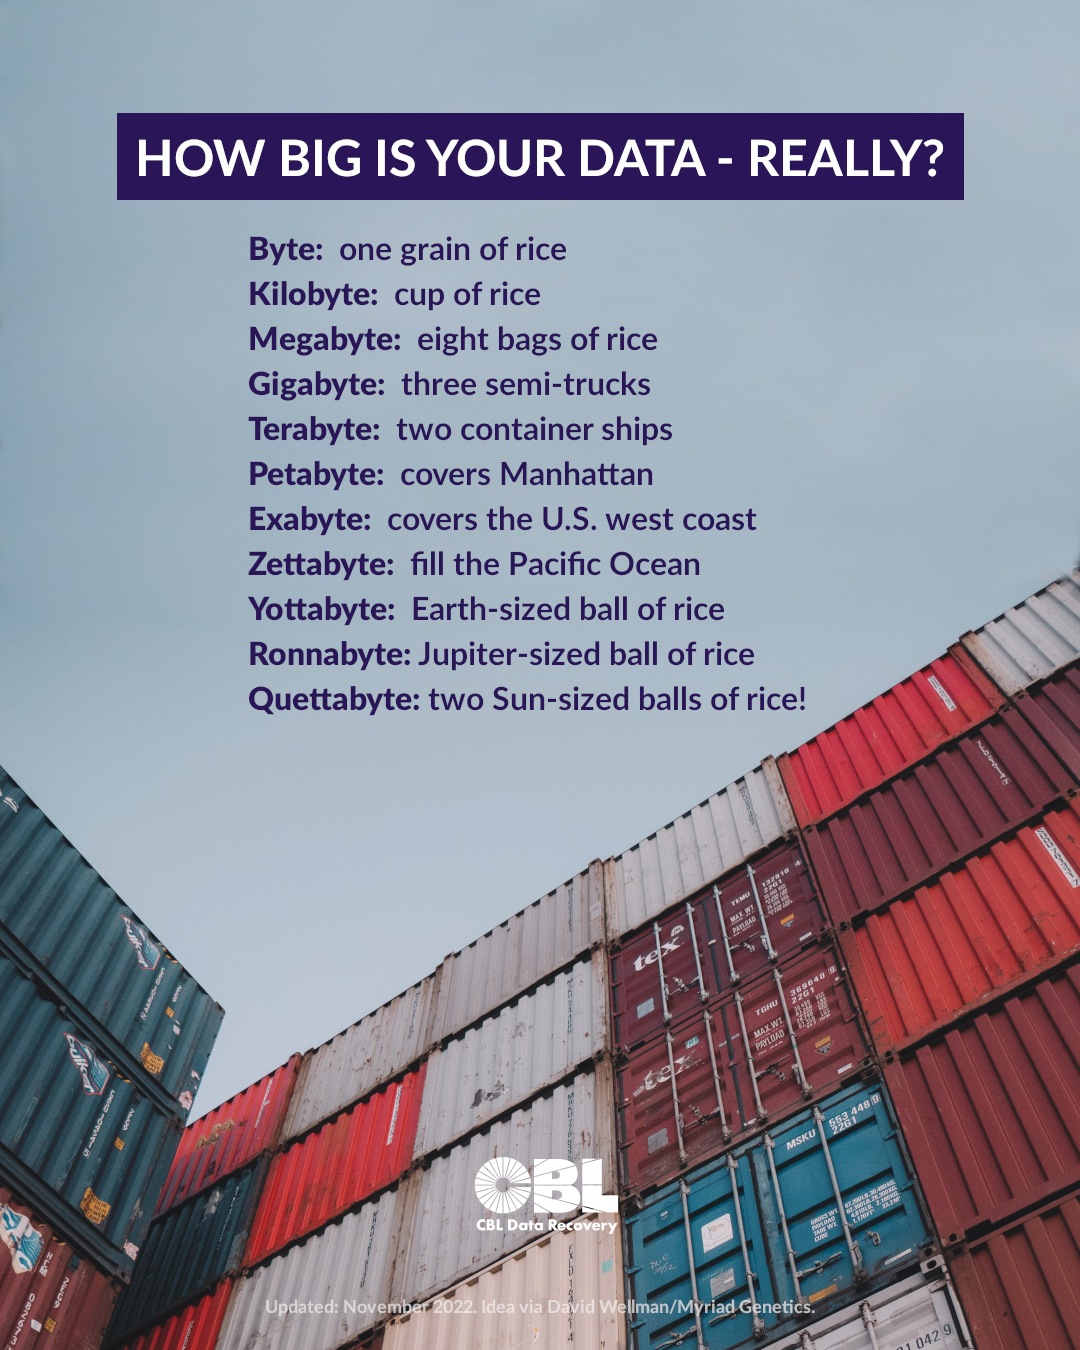 purple highlighted title box: HOW BIG IS YOUR DATA - REALLY? Followed by a list of sizes: Byte: one grain of rice. Kilobyte: cup of rice. Megabyte: eight bags of rice. Gigabyte: three semi-trucks. Terabyte: two container ships. Petabyte: covers Manhattan. Exabyte: covers the U.S. west coast. Zettabyte: fill the Pacific Ocean. Yottabyte: Earth-sized ball of rice. Ronnabyte: Jupiter-sized ball of rice. Quettabyte: two Sun-sized balls of rice! Background picture is looking upwards at a stack of very high shipping containers. Hattip to David Wellman/Myriad Genetics for the original metaphor. Image by CBL Data Recovery.